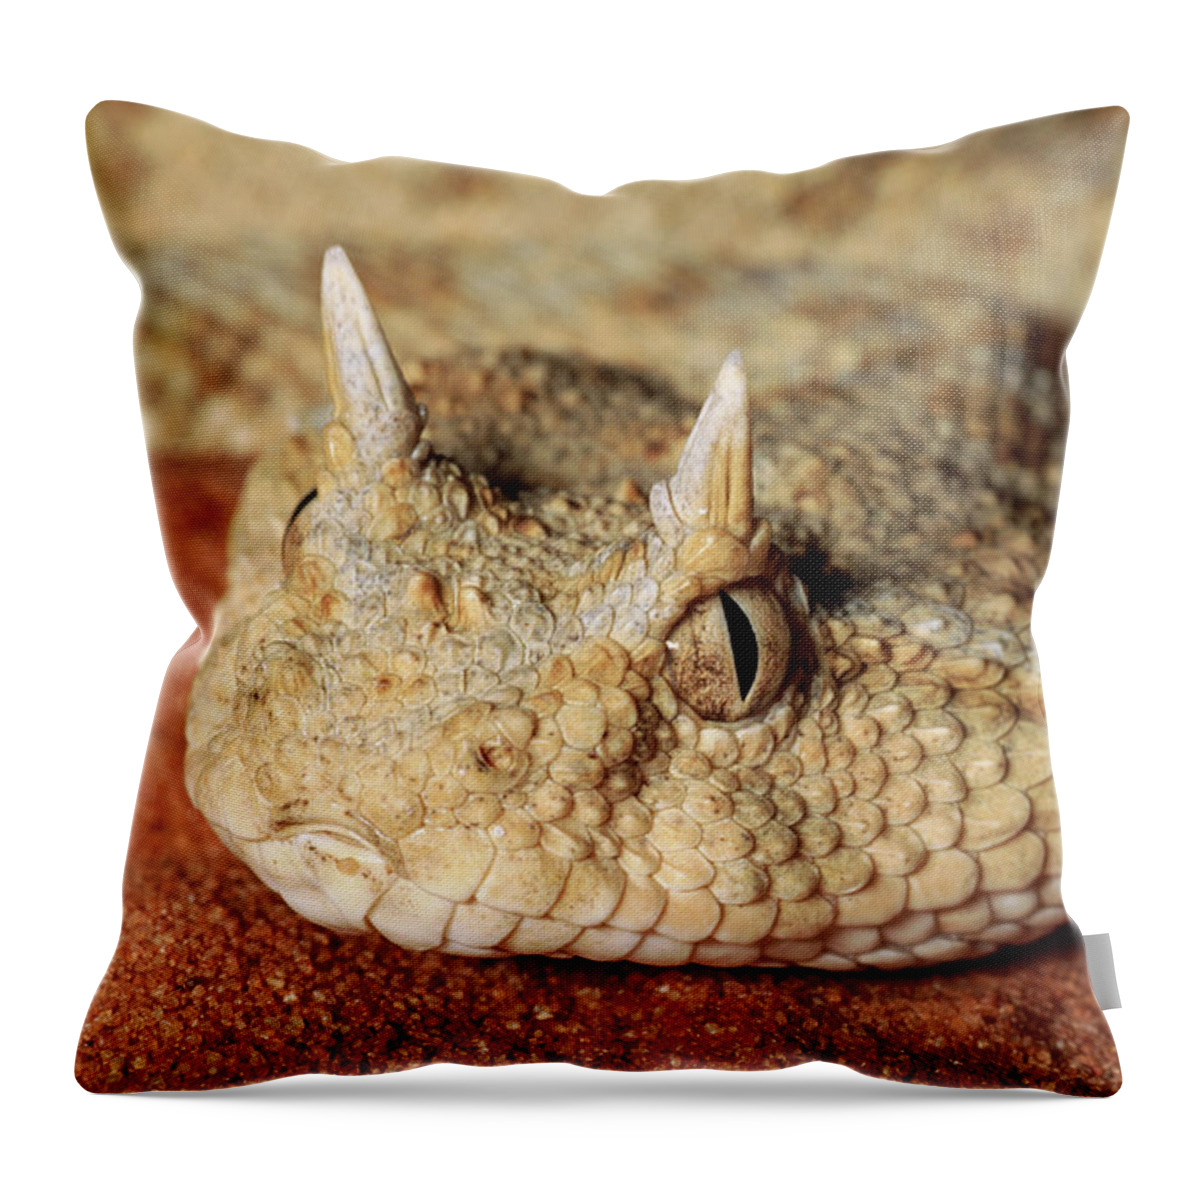 Mp Throw Pillow featuring the photograph Horned Viper Cerastes Cerastes Portrait by Michael & Patricia Fogden